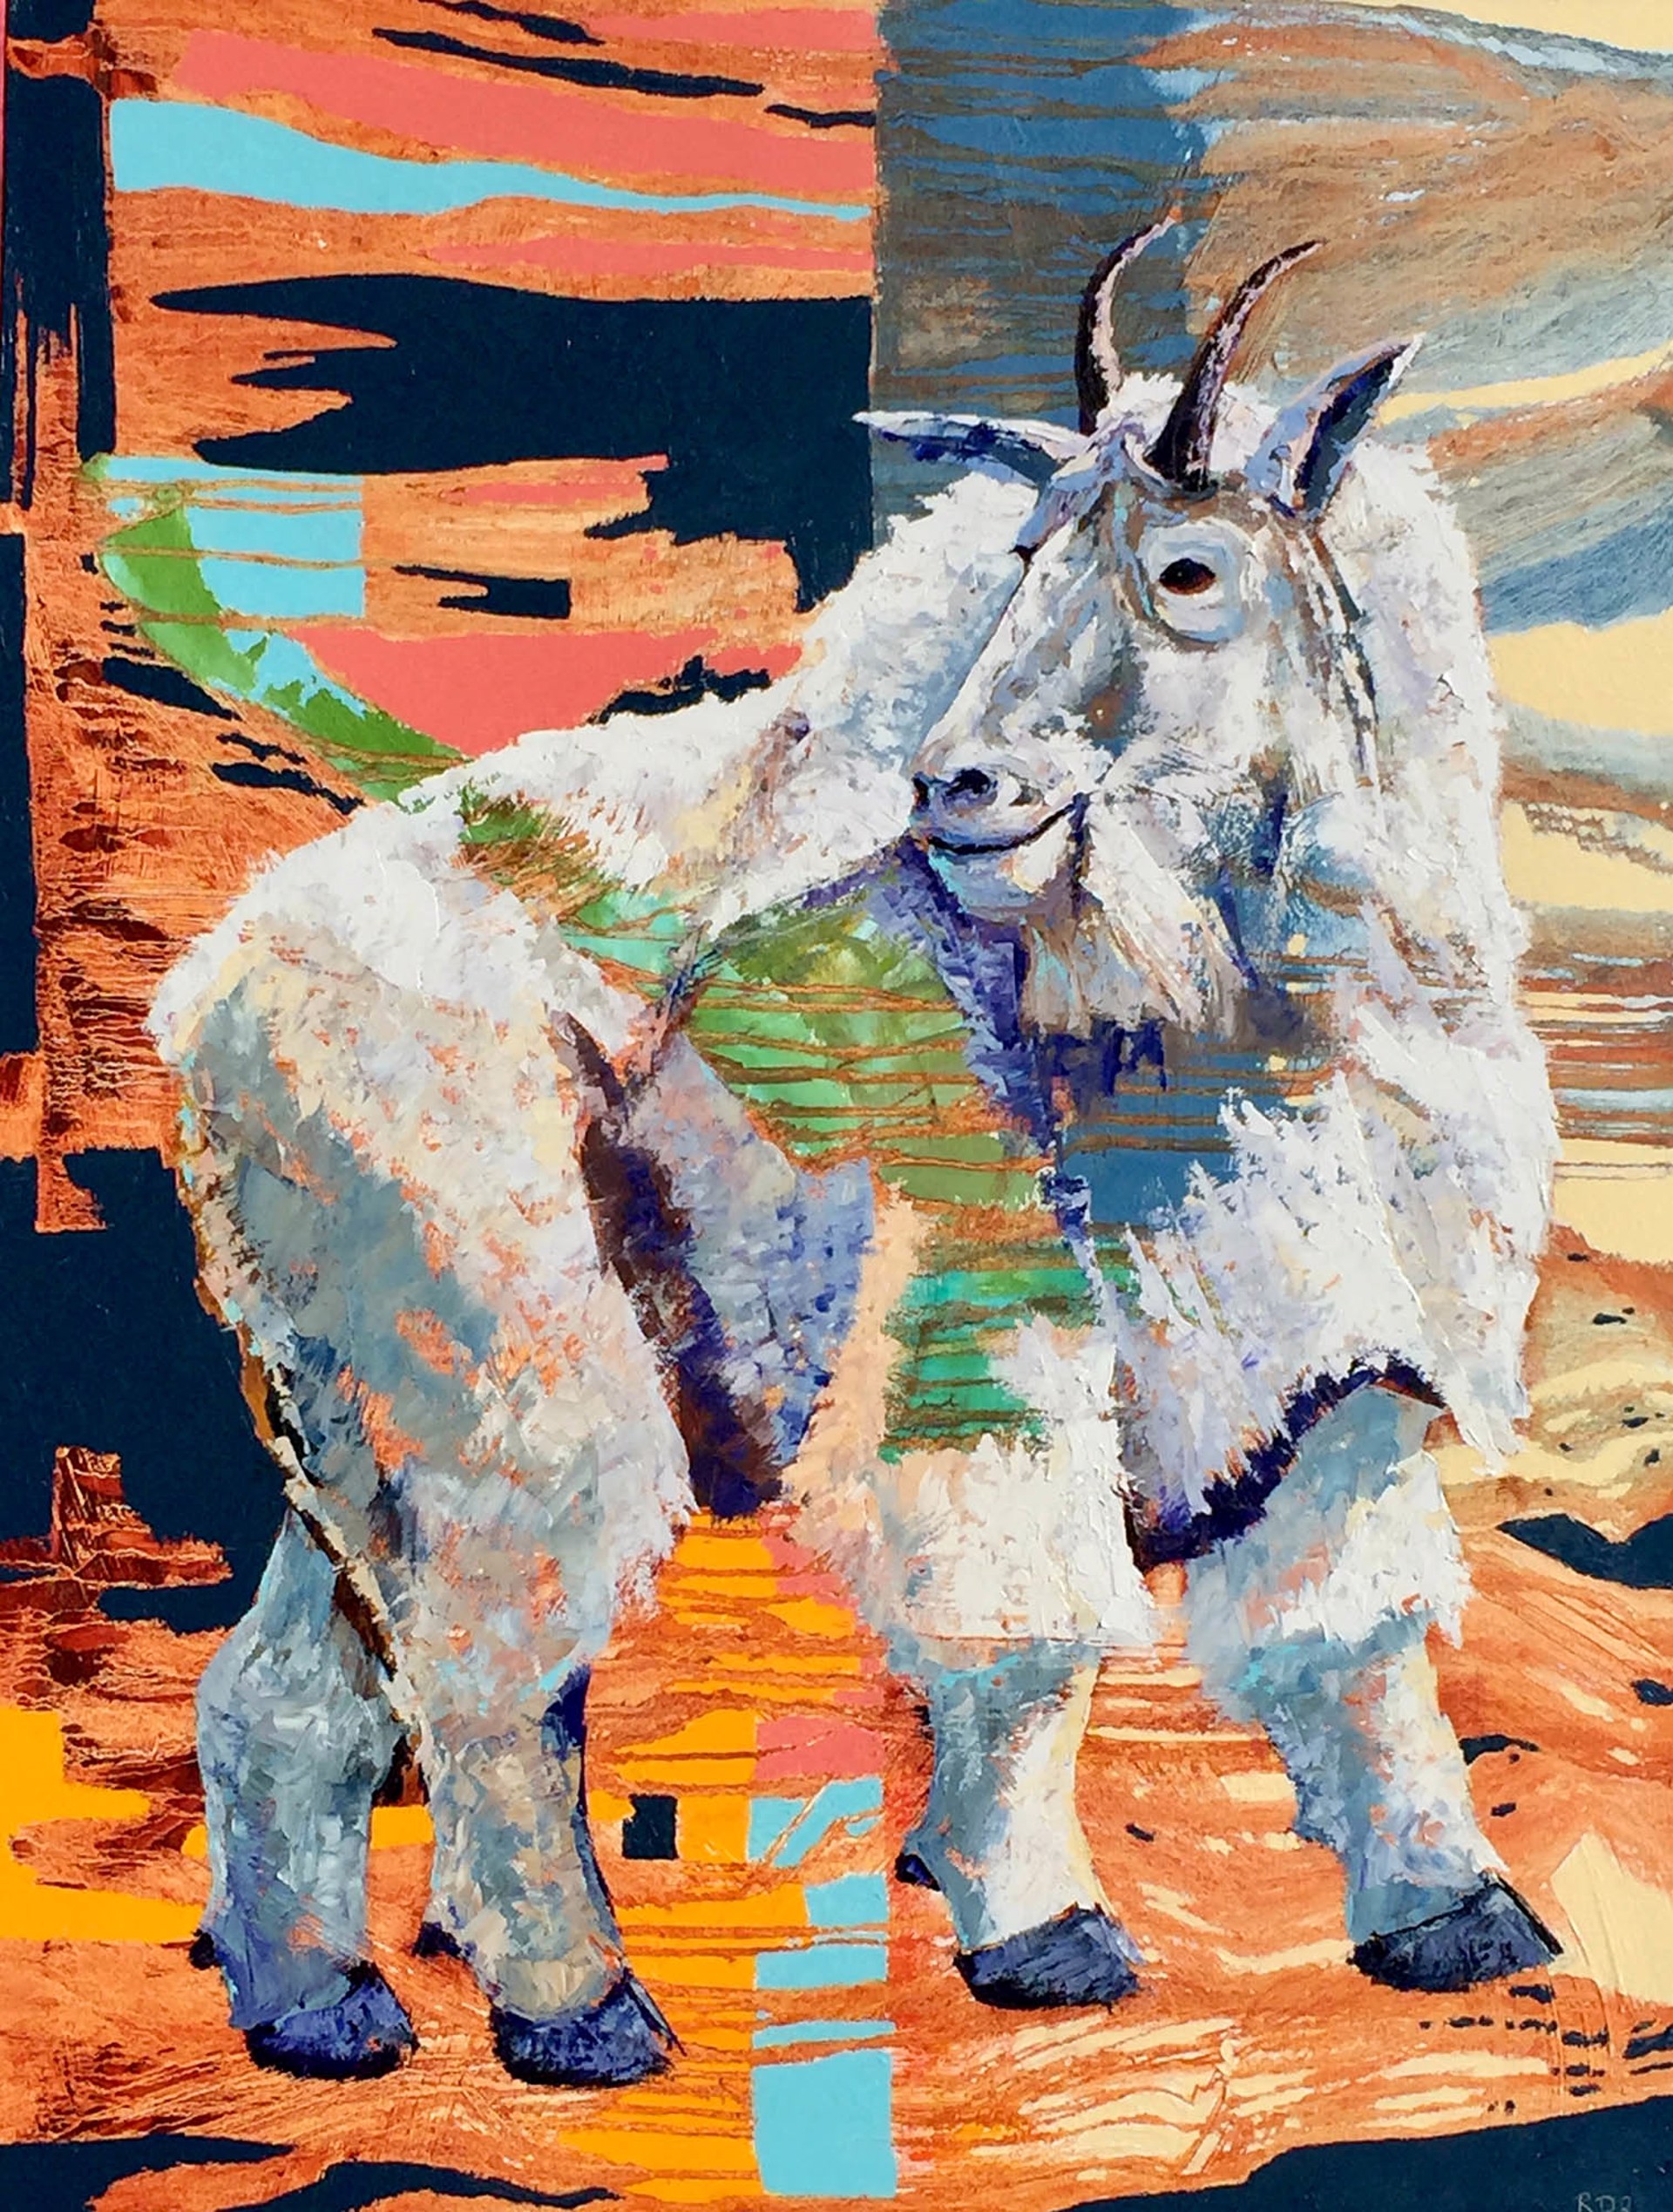 Original Oil Painting Featuring A Mountain Goat In A Color Block Graphic Style